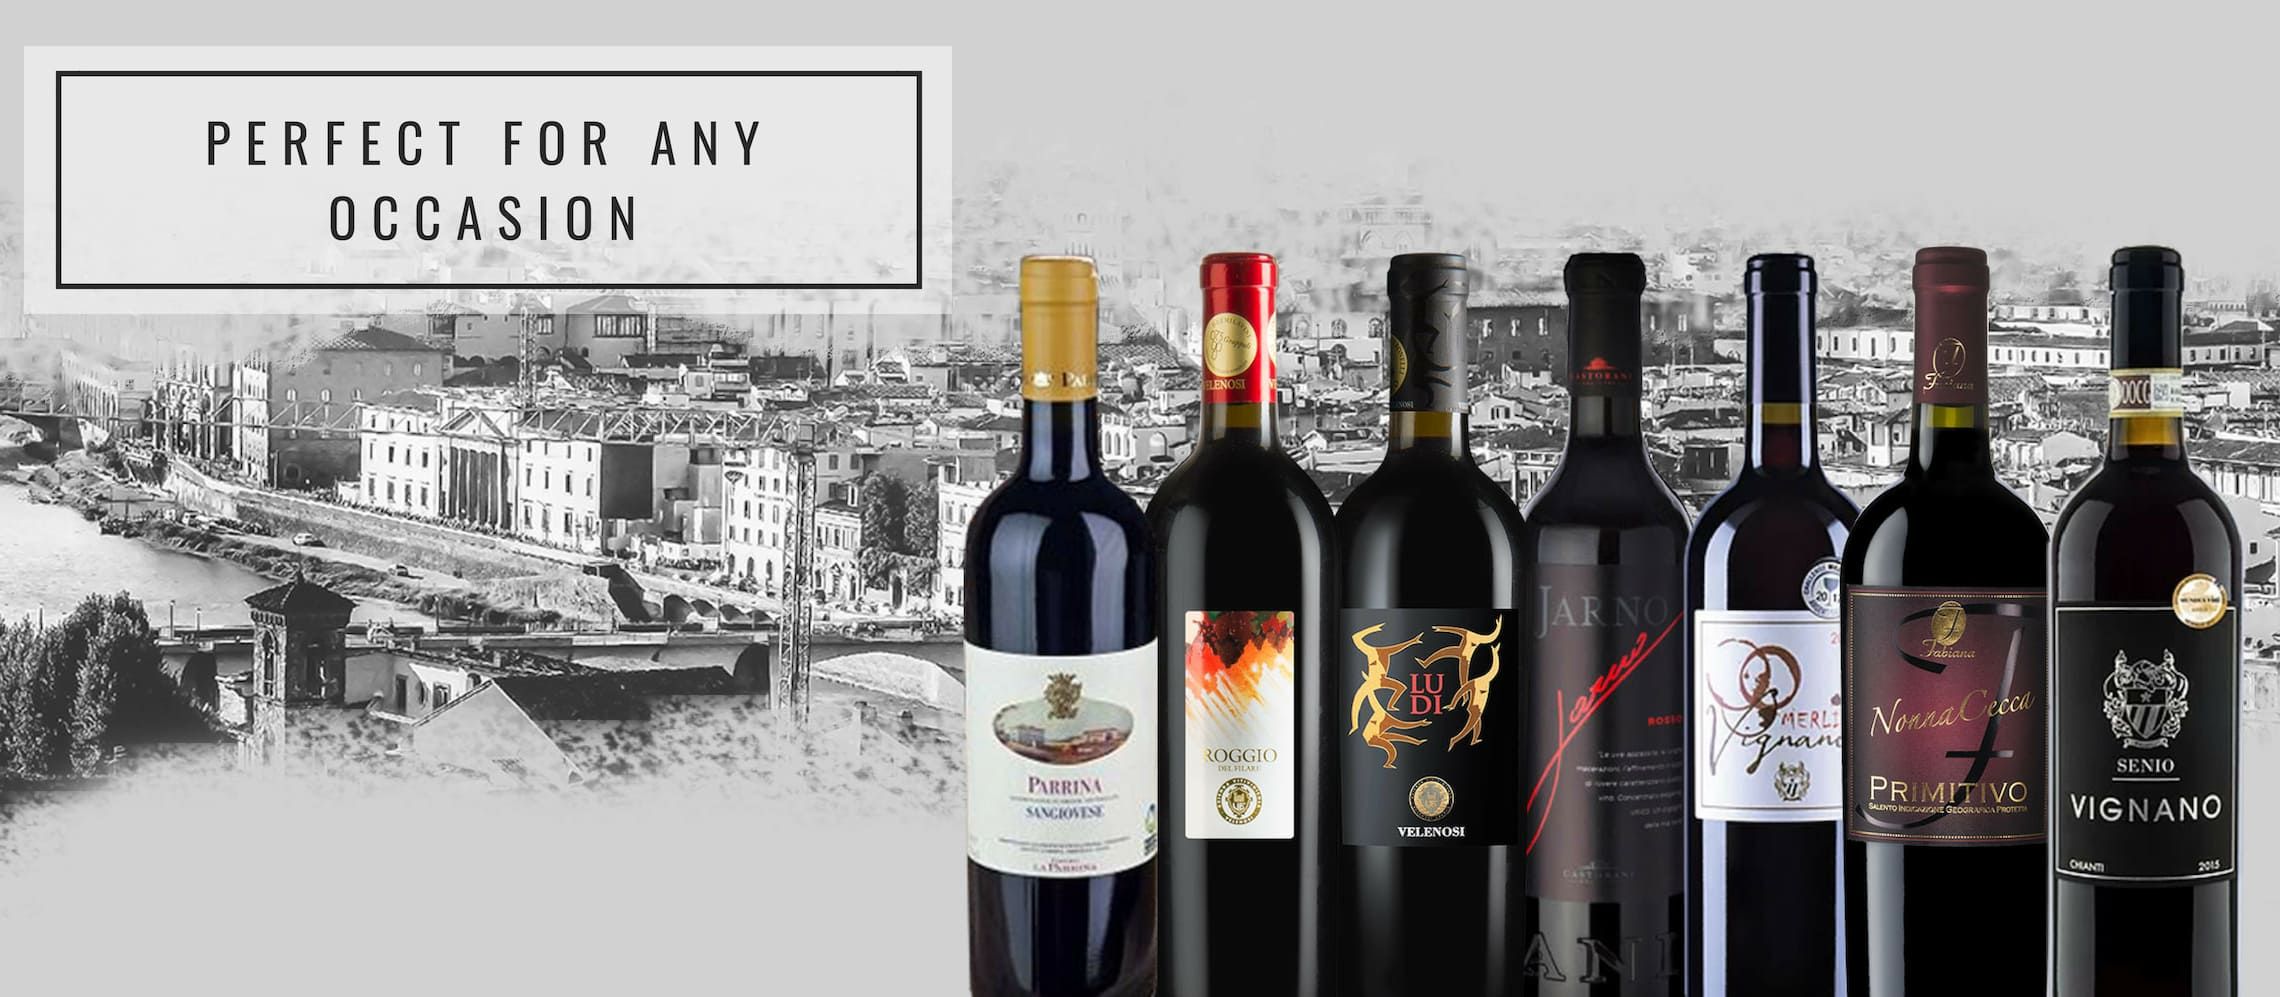 Photo for: Top Italian Wines That Suit Every Occasion